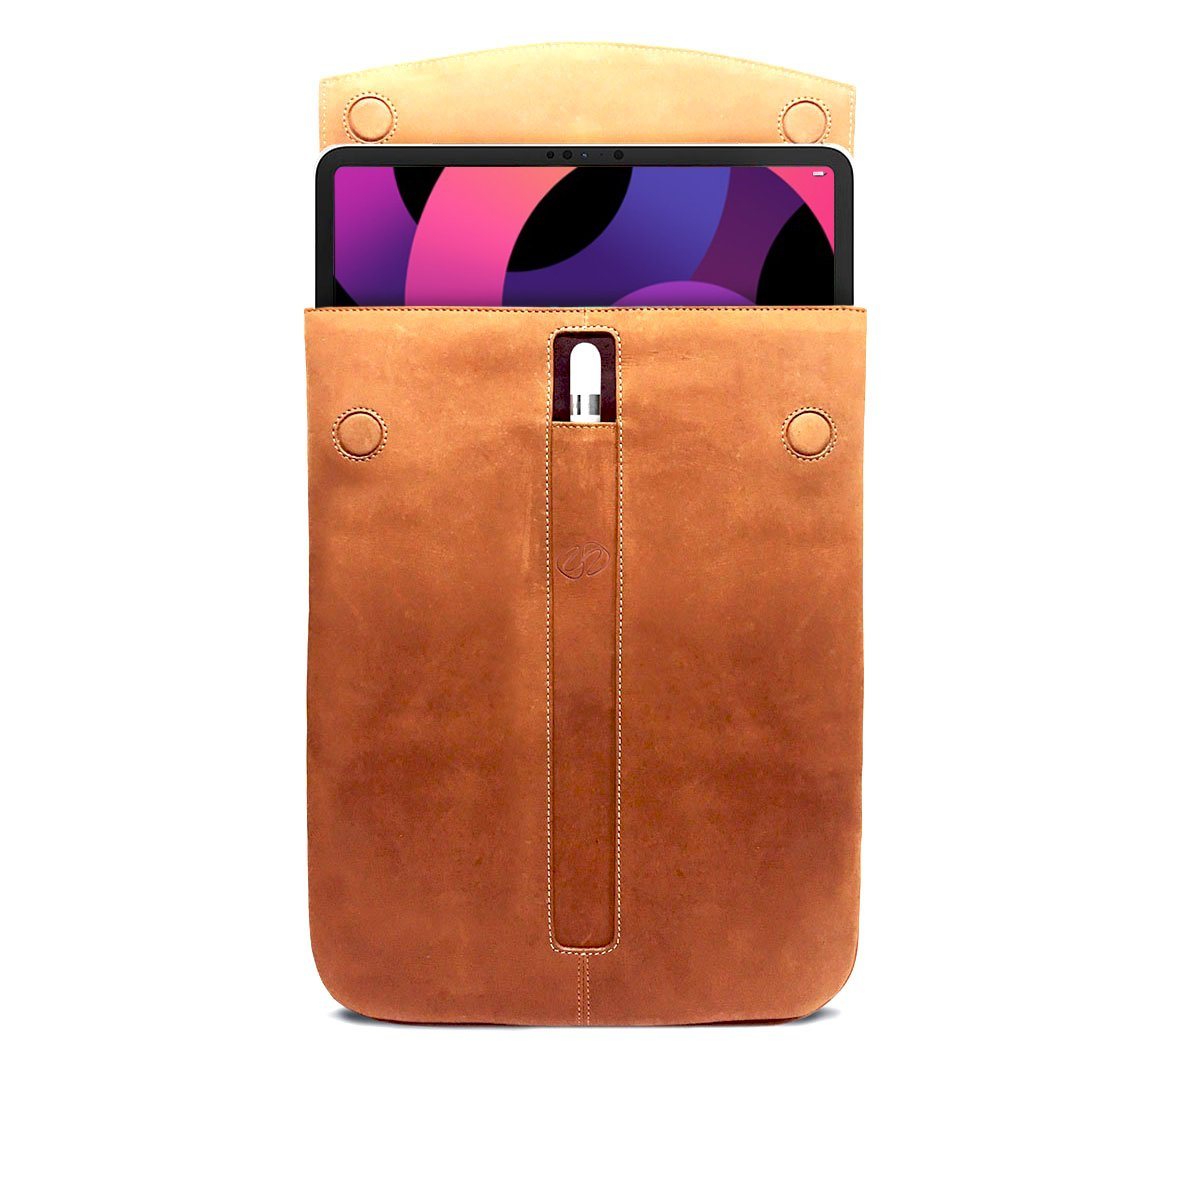 New Arrivals Tagged Louis Vuitton iPad case - HypedEffect